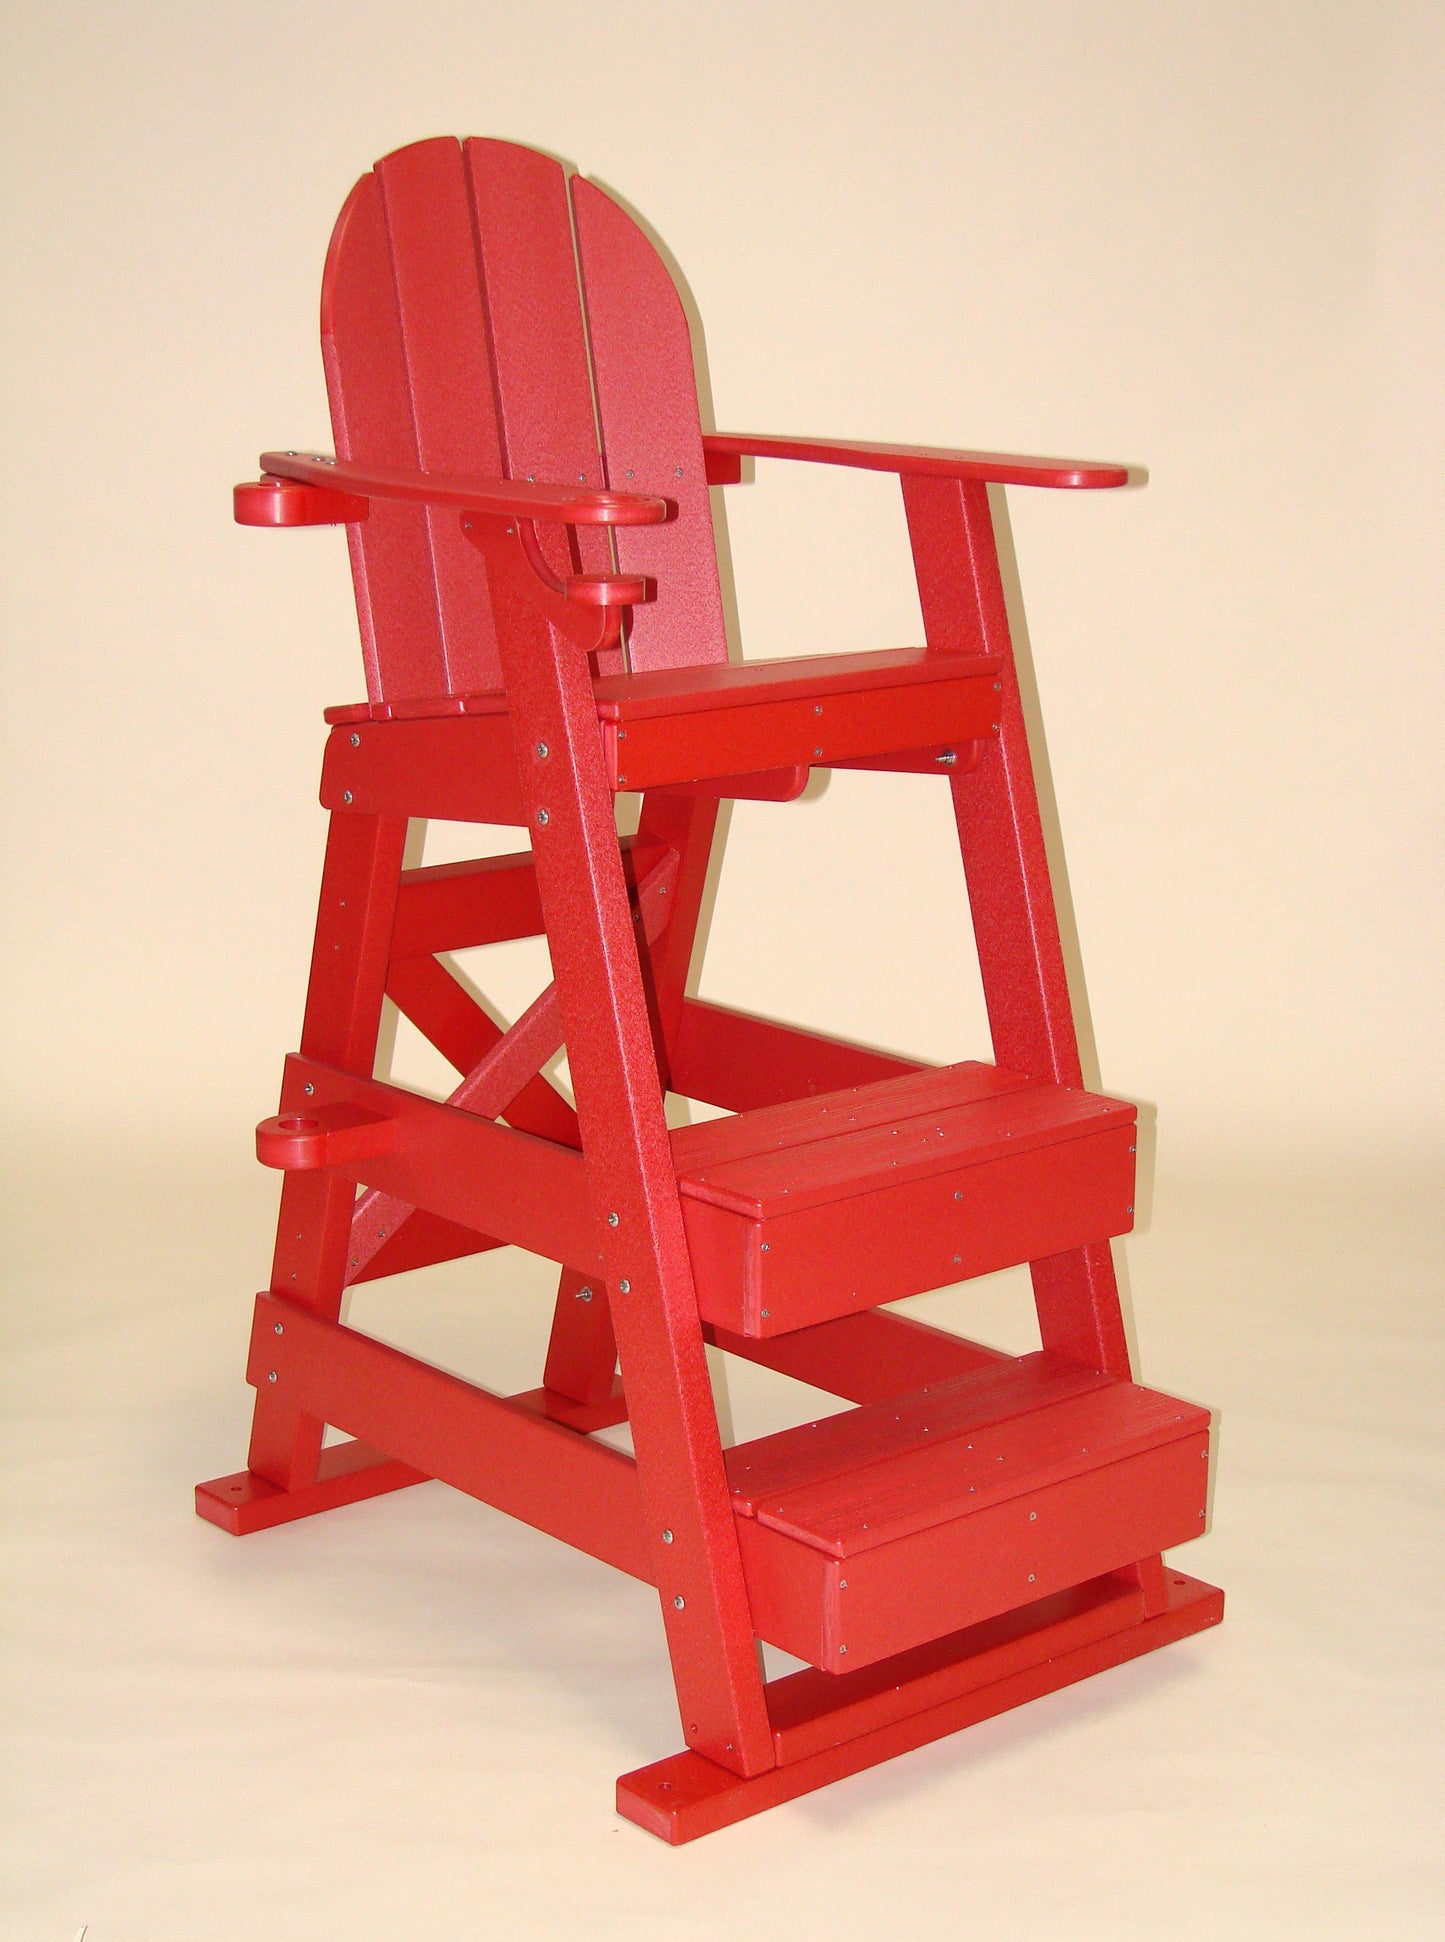 Tailwind Furniture Recycled Plastic Lifeguard Chair - LG-510 - Seat Height: 40" - LEAD TIME TO SHIP 20 BUSINESS DAYS